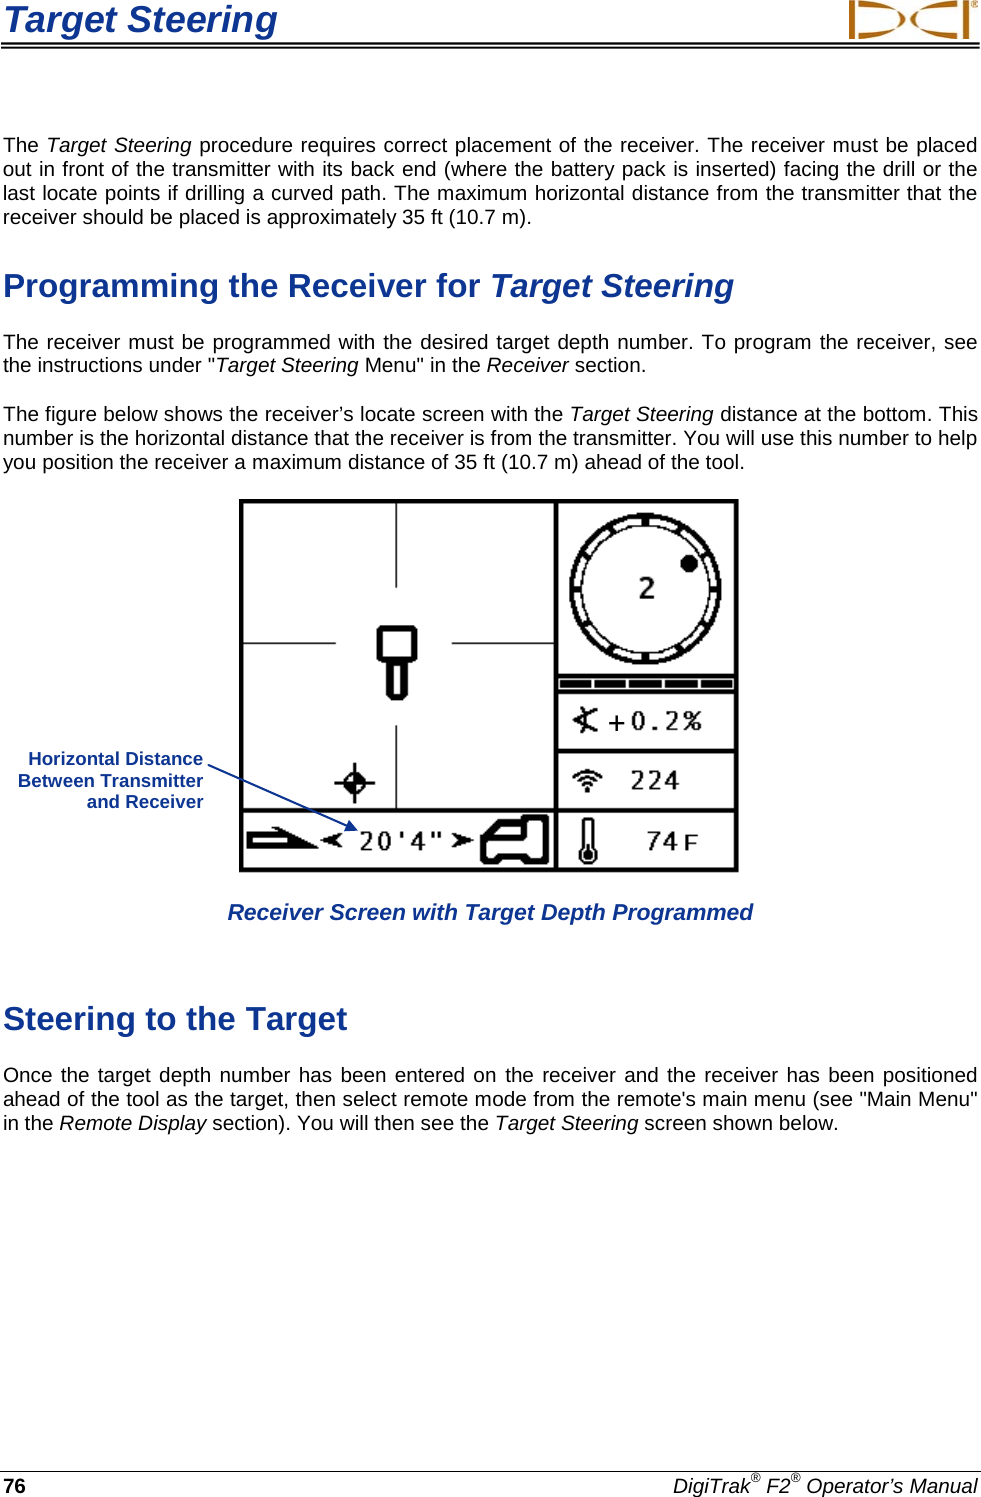 Target Steering     76 DigiTrak® F2® Operator’s Manual The Target Steering procedure requires correct placement of the receiver. The receiver must be placed out in front of the transmitter with its back end (where the battery pack is inserted) facing the drill or the last locate points if drilling a curved path. The maximum horizontal distance from the transmitter that the receiver should be placed is approximately 35 ft (10.7 m).  Programming the Receiver for Target Steering The receiver must be programmed with the desired target depth number. To program the receiver, see the instructions under &quot;Target Steering Menu&quot; in the Receiver section. The figure below shows the receiver’s locate screen with the Target Steering distance at the bottom. This number is the horizontal distance that the receiver is from the transmitter. You will use this number to help you position the receiver a maximum distance of 35 ft (10.7 m) ahead of the tool.   Receiver Screen with Target Depth Programmed  Steering to the Target Once the target depth number has been entered on the receiver and the receiver has been positioned ahead of the tool as the target, then select remote mode from the remote&apos;s main menu (see &quot;Main Menu&quot; in the Remote Display section). You will then see the Target Steering screen shown below.   Horizontal Distance Between Transmitter and Receiver  + 